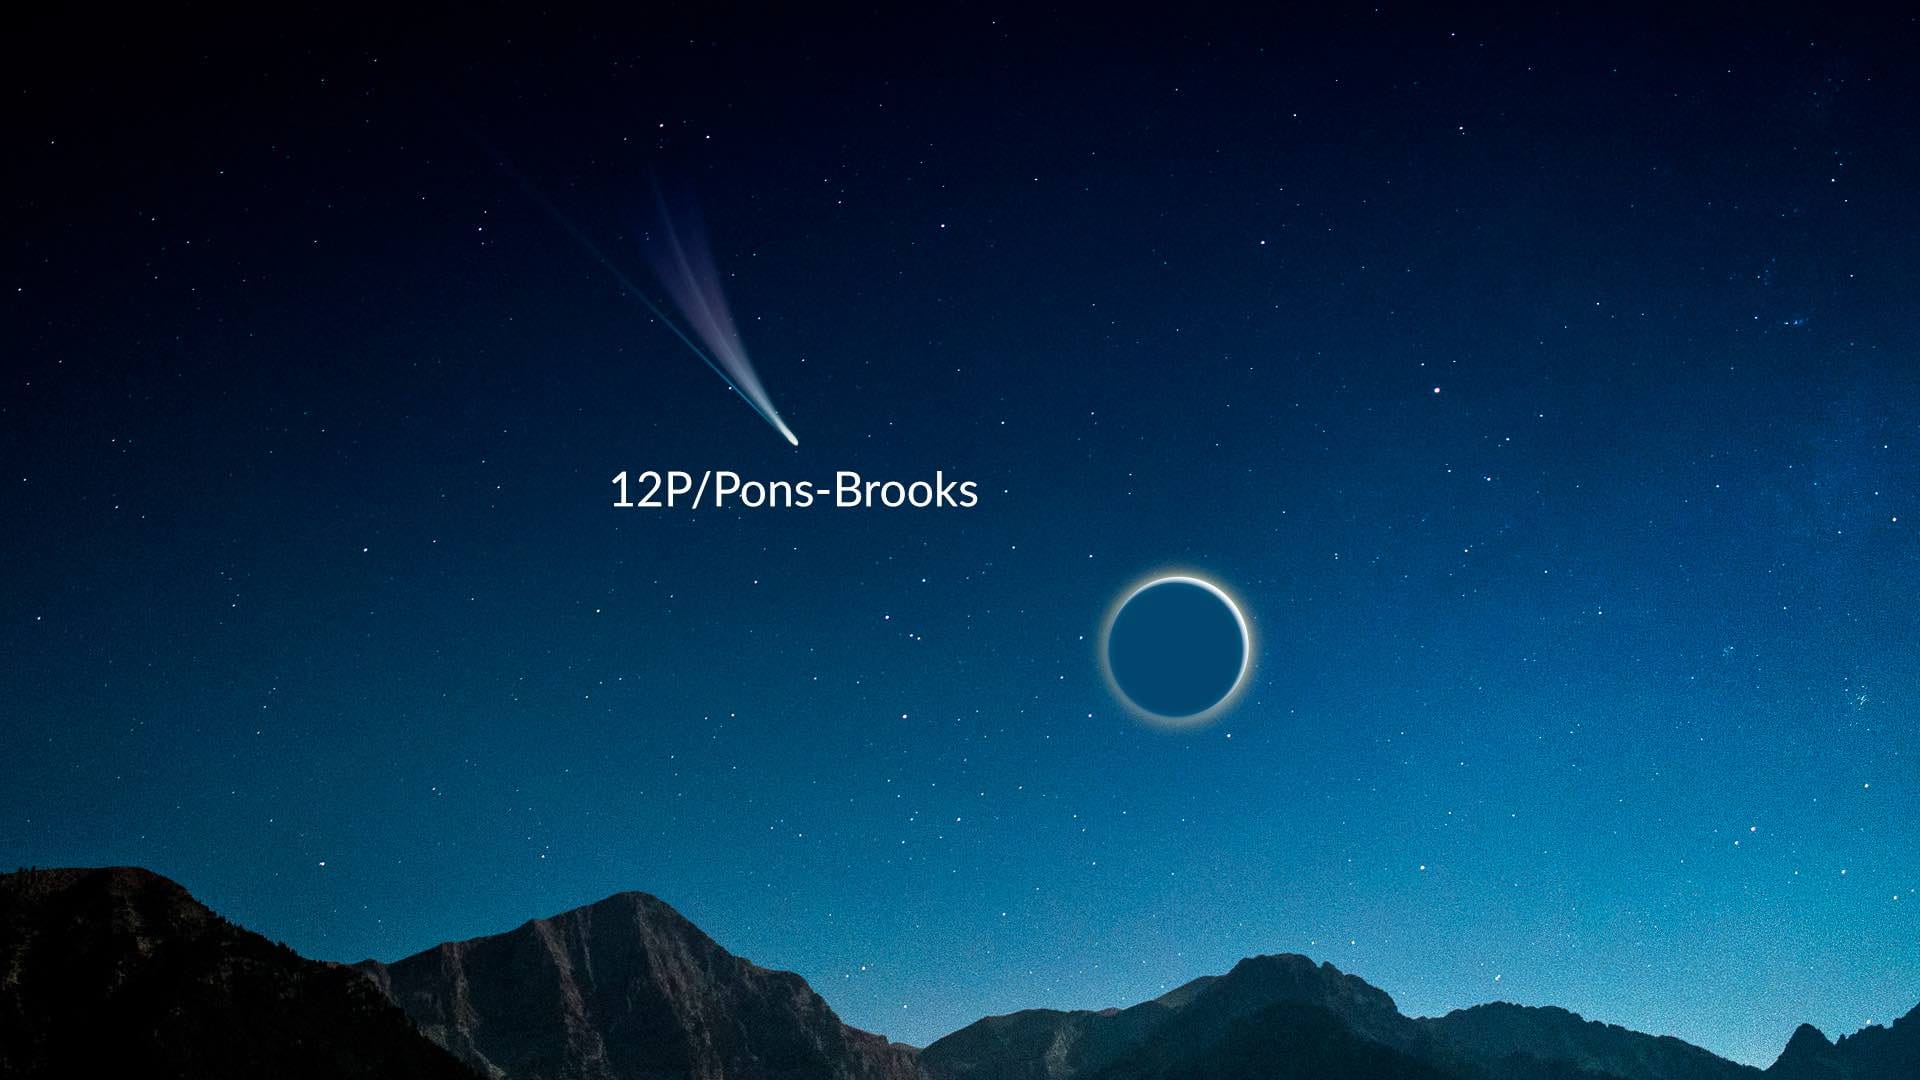 Comet Pons-Brooks at its brightest